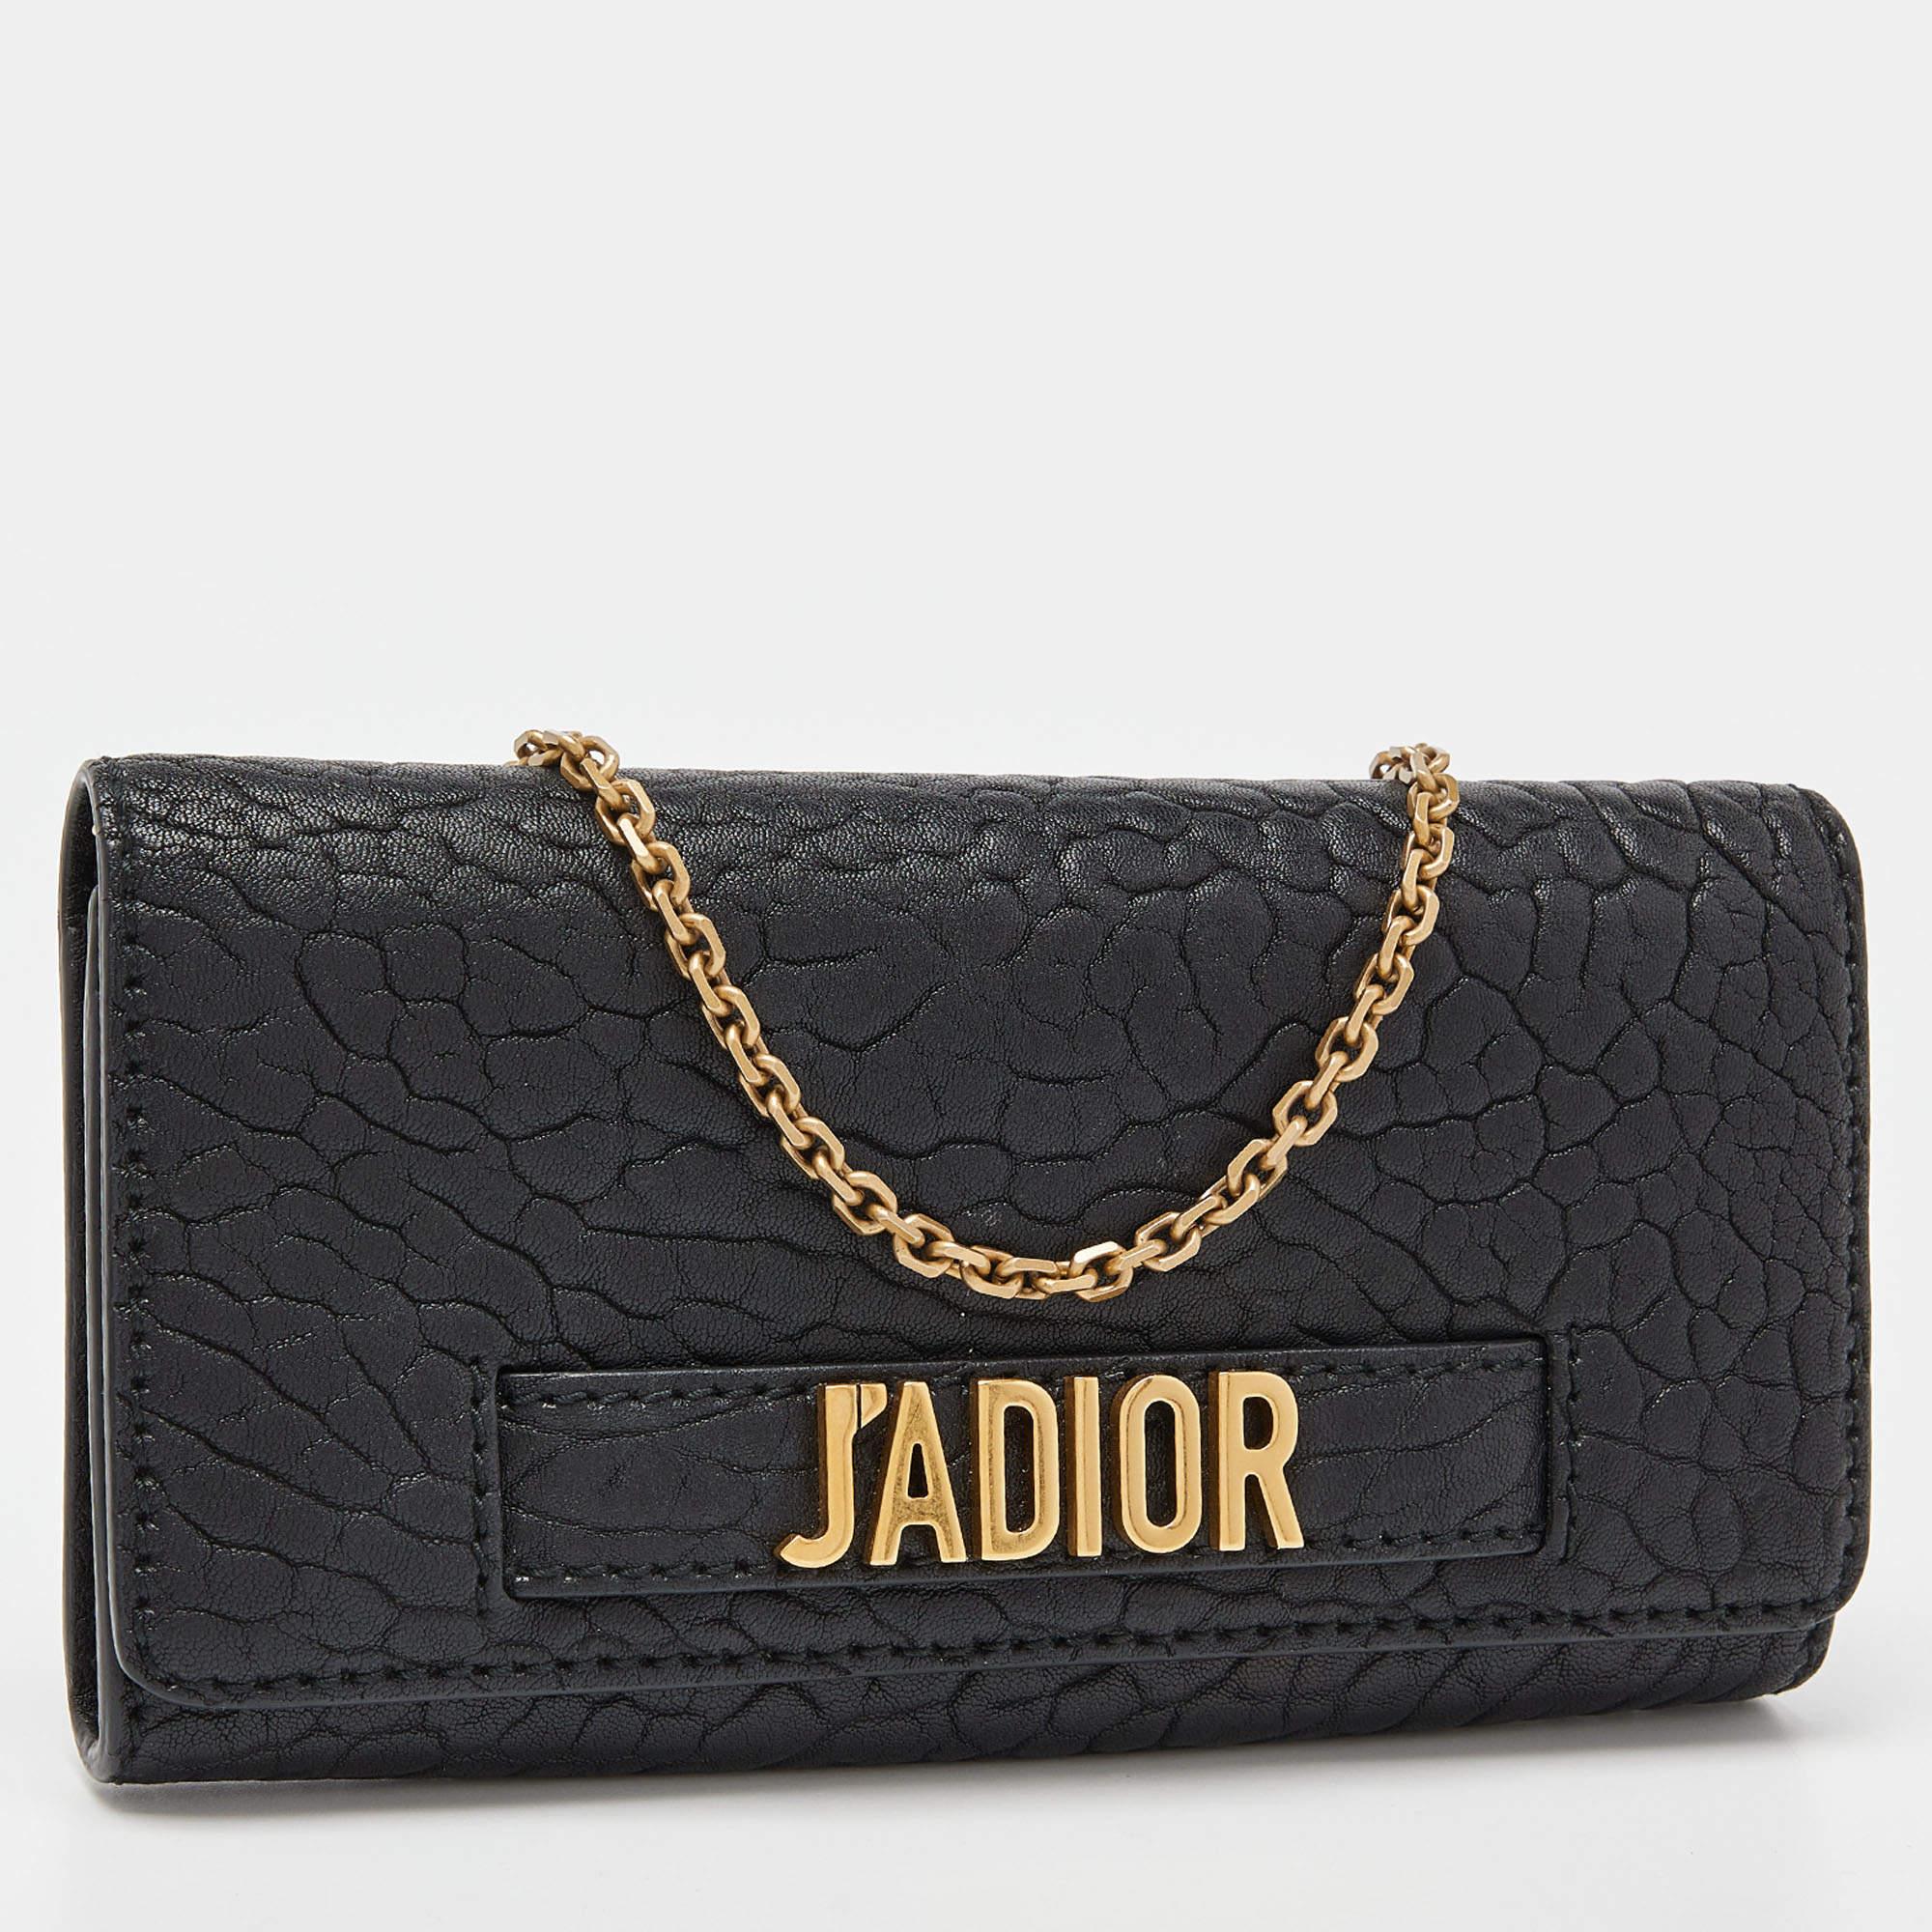 Get the assurance of quality and style that never fades with this Dior Wallet On Chain. It is sewn using leather and the interior has a wallet-like layout with space for cards, cash, and coins. The Dior WOC is complete with a shoulder strap.

